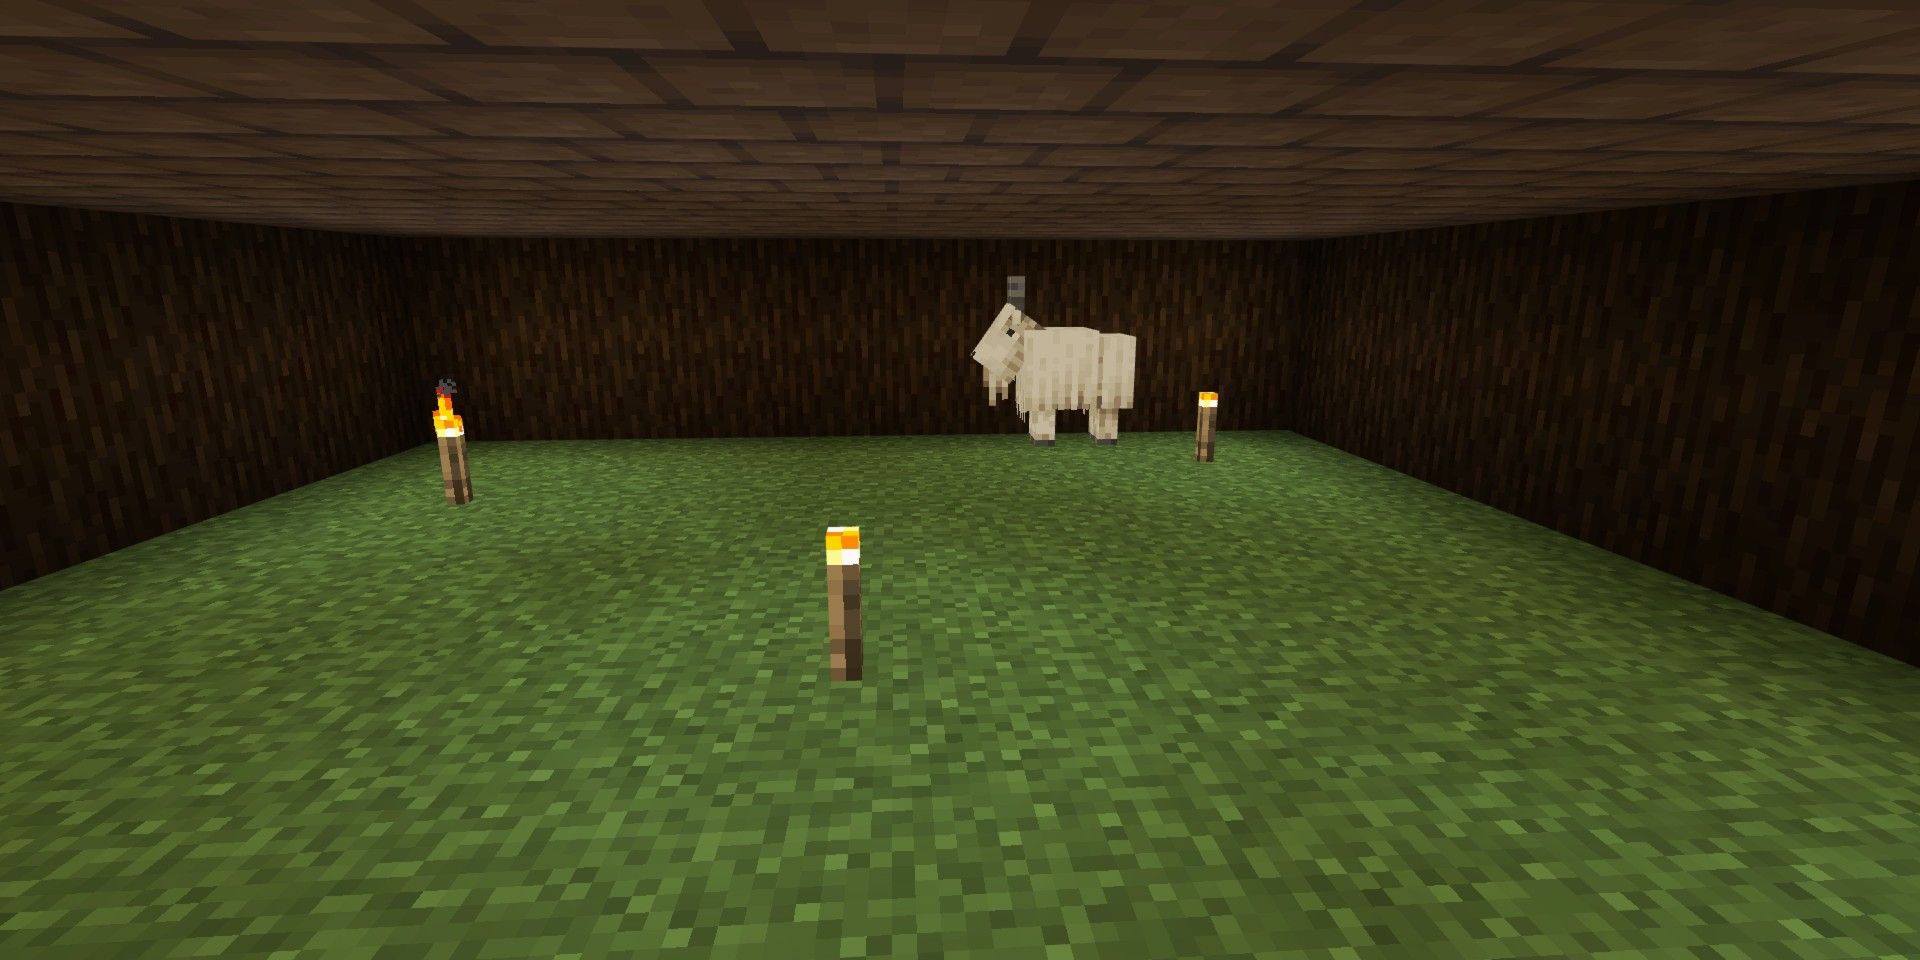 Minecraft - goat in a wooden room